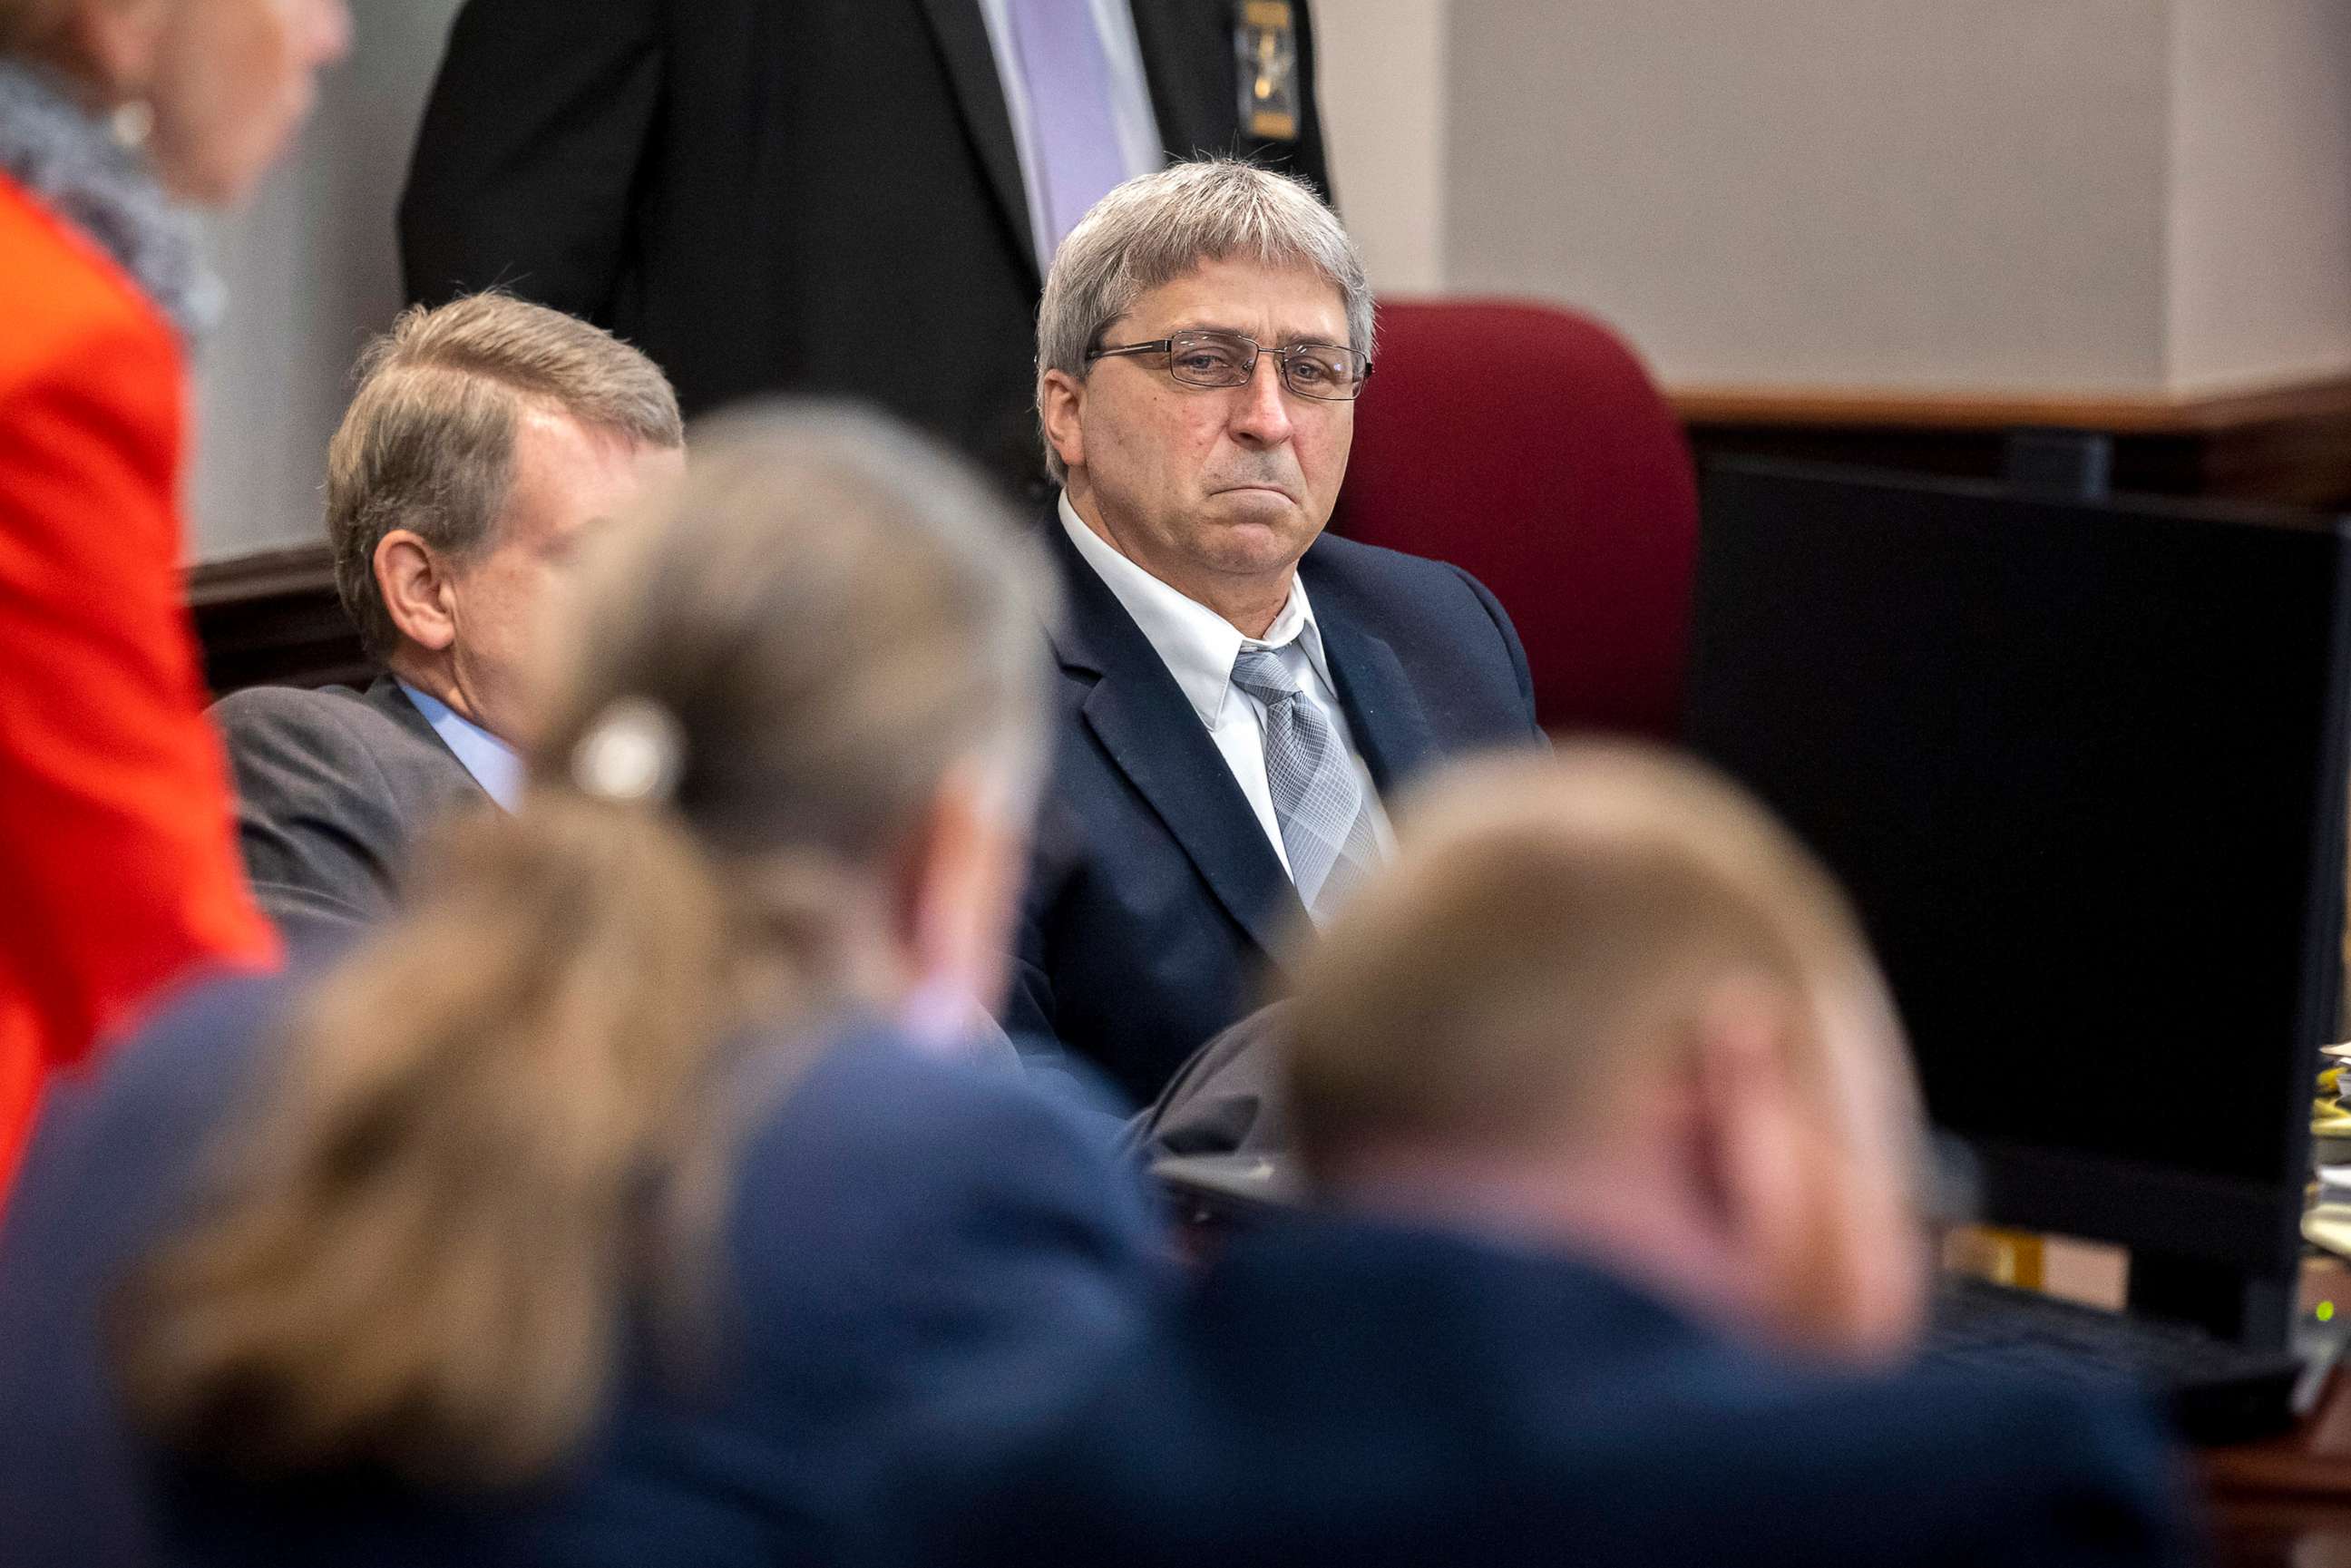 PHOTO: William "Roddie" Bryan listens to questions during jury selection for the trial of Greg and Travis McMichael and their neighbor, Bryan, on Oct. 25, 2021 in Brunswick, Ga. The three are charged with the slaying of 25-year-old Ahmaud Arbery.